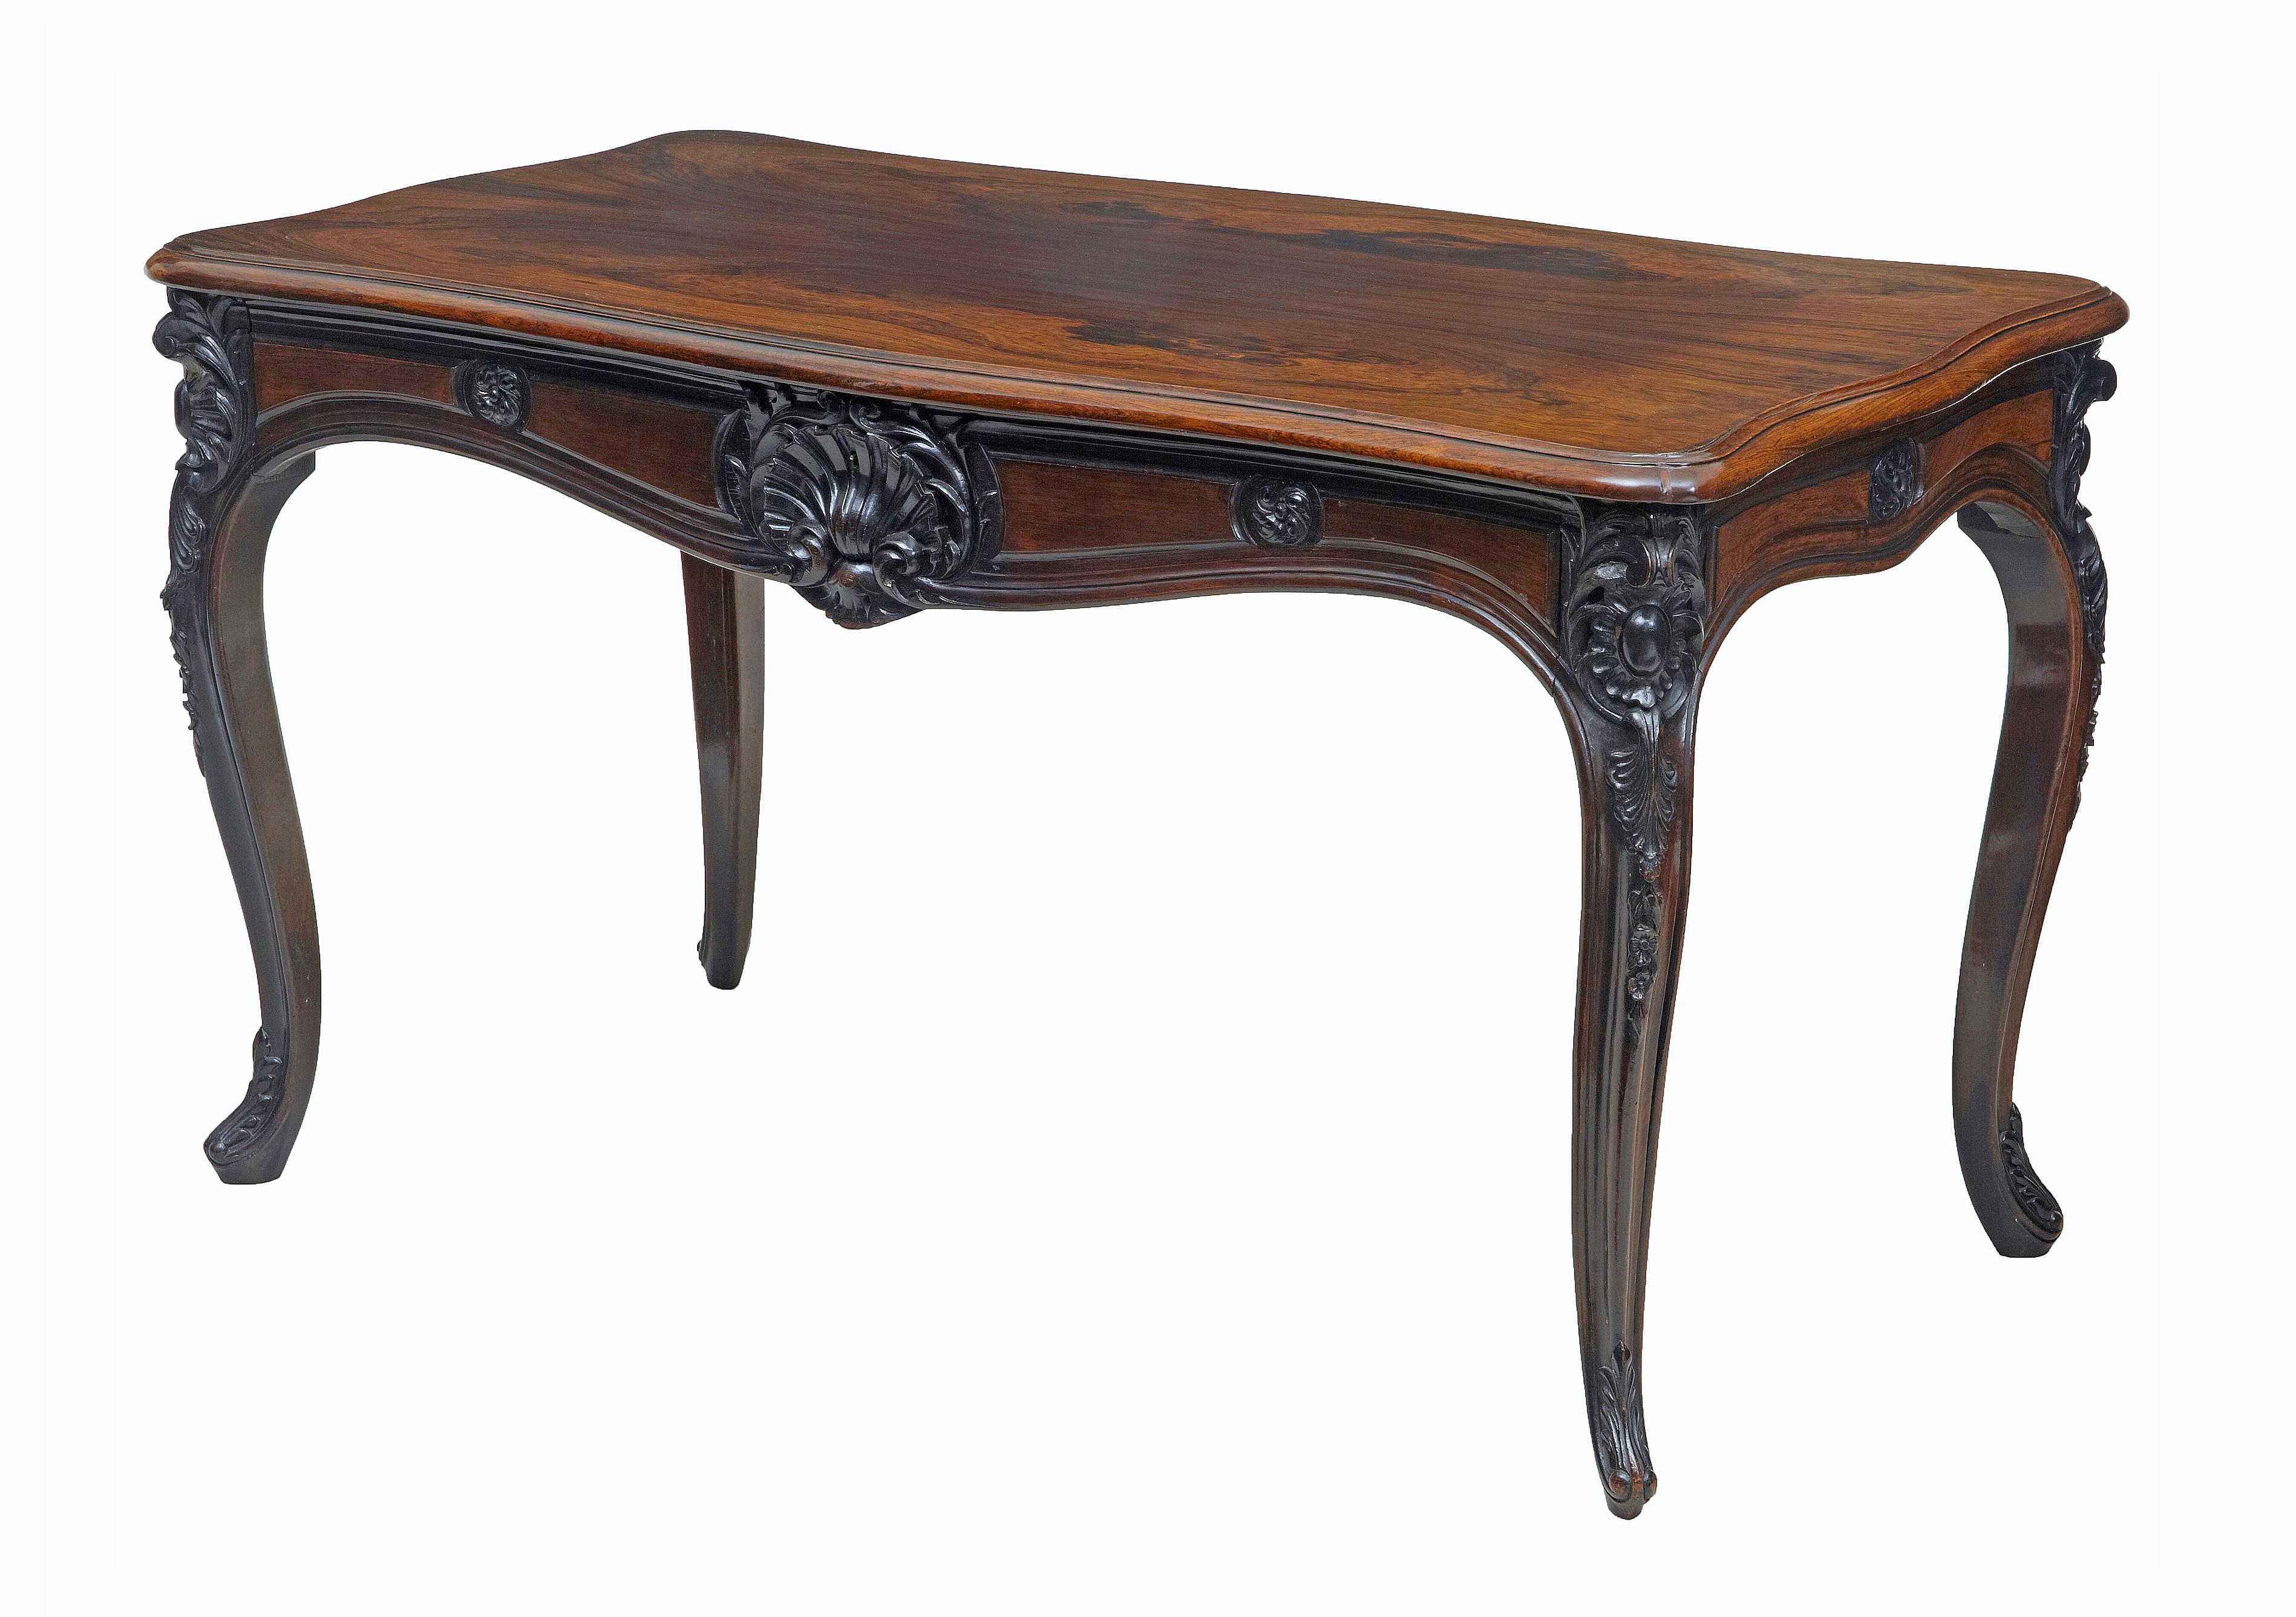 19th century carved palisander occasional table, circa 1870.

Good quality carved rosewood occasional table or desk, circa 1880.

Beautiful grain and color to this table that could be used as a sofa or hall table or a ladies desk.

Single